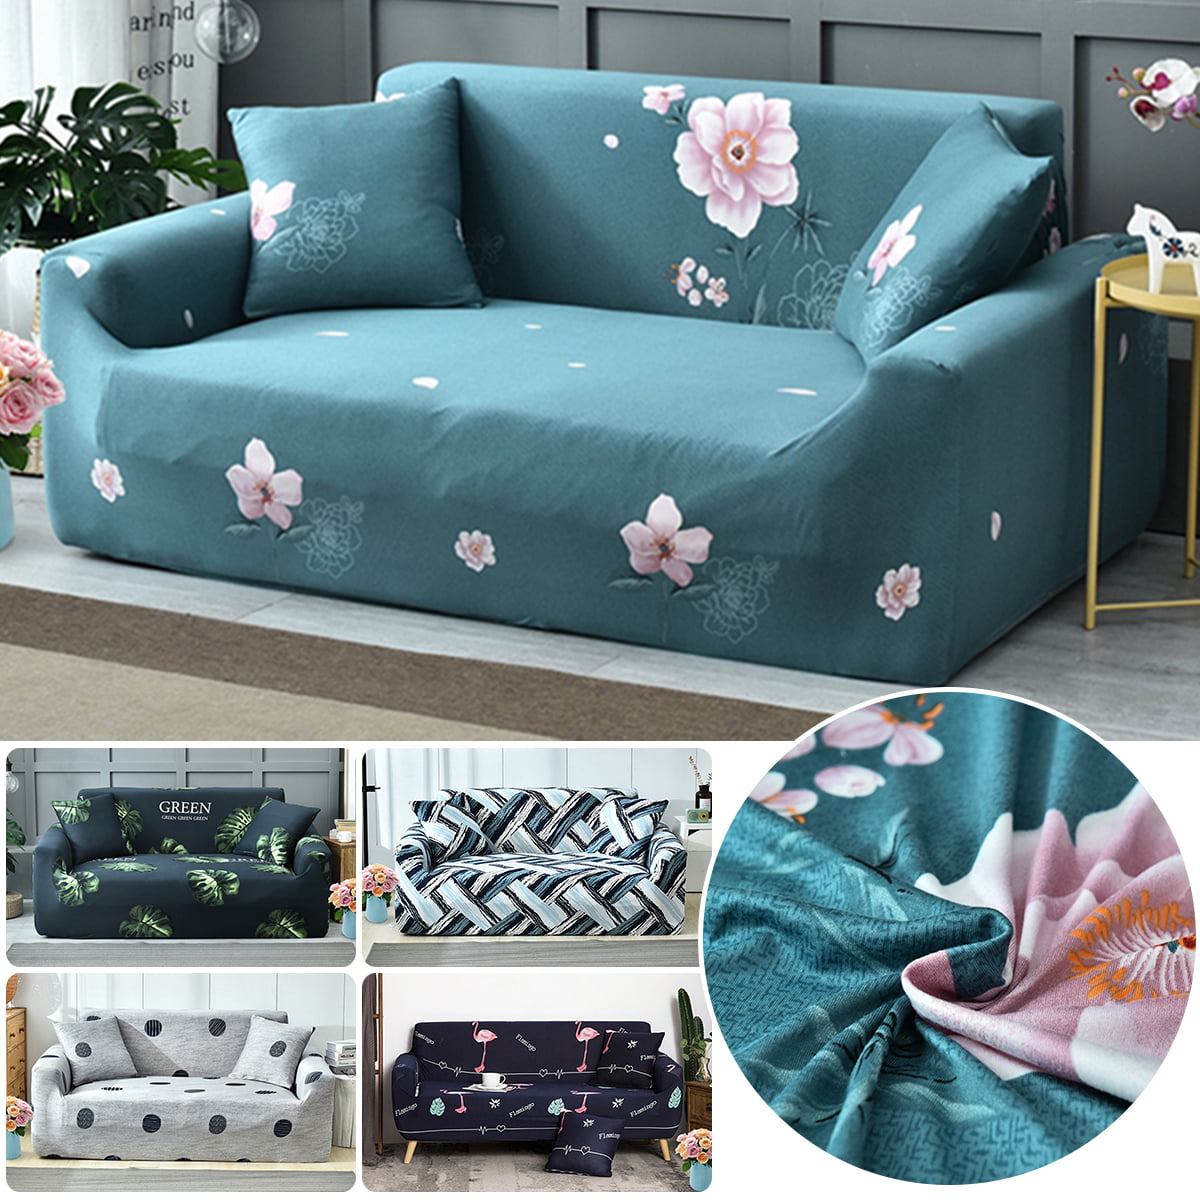 Details about   PREMIUM Elastic STRETCH SOFA COVERS Slipcover Protector Settee 1/2/3/4 Seater 